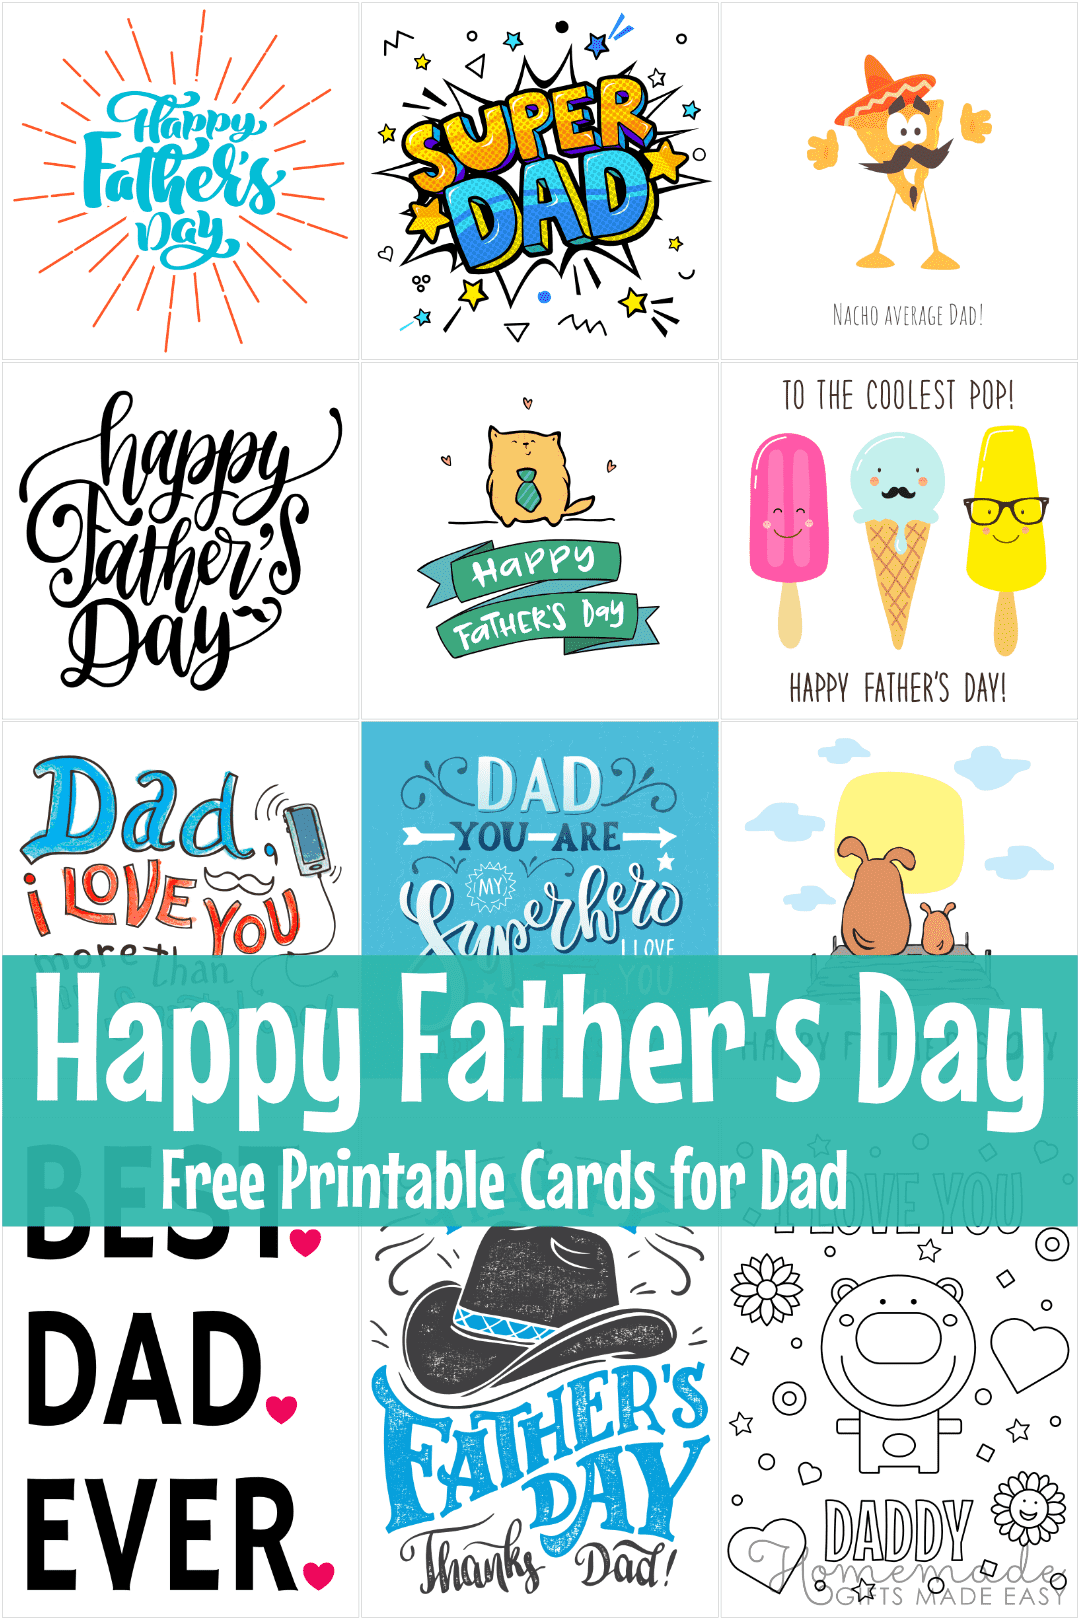 product-authenticity-guarantee-hr-best-dad-c-h-f-s-day-card-hy-h